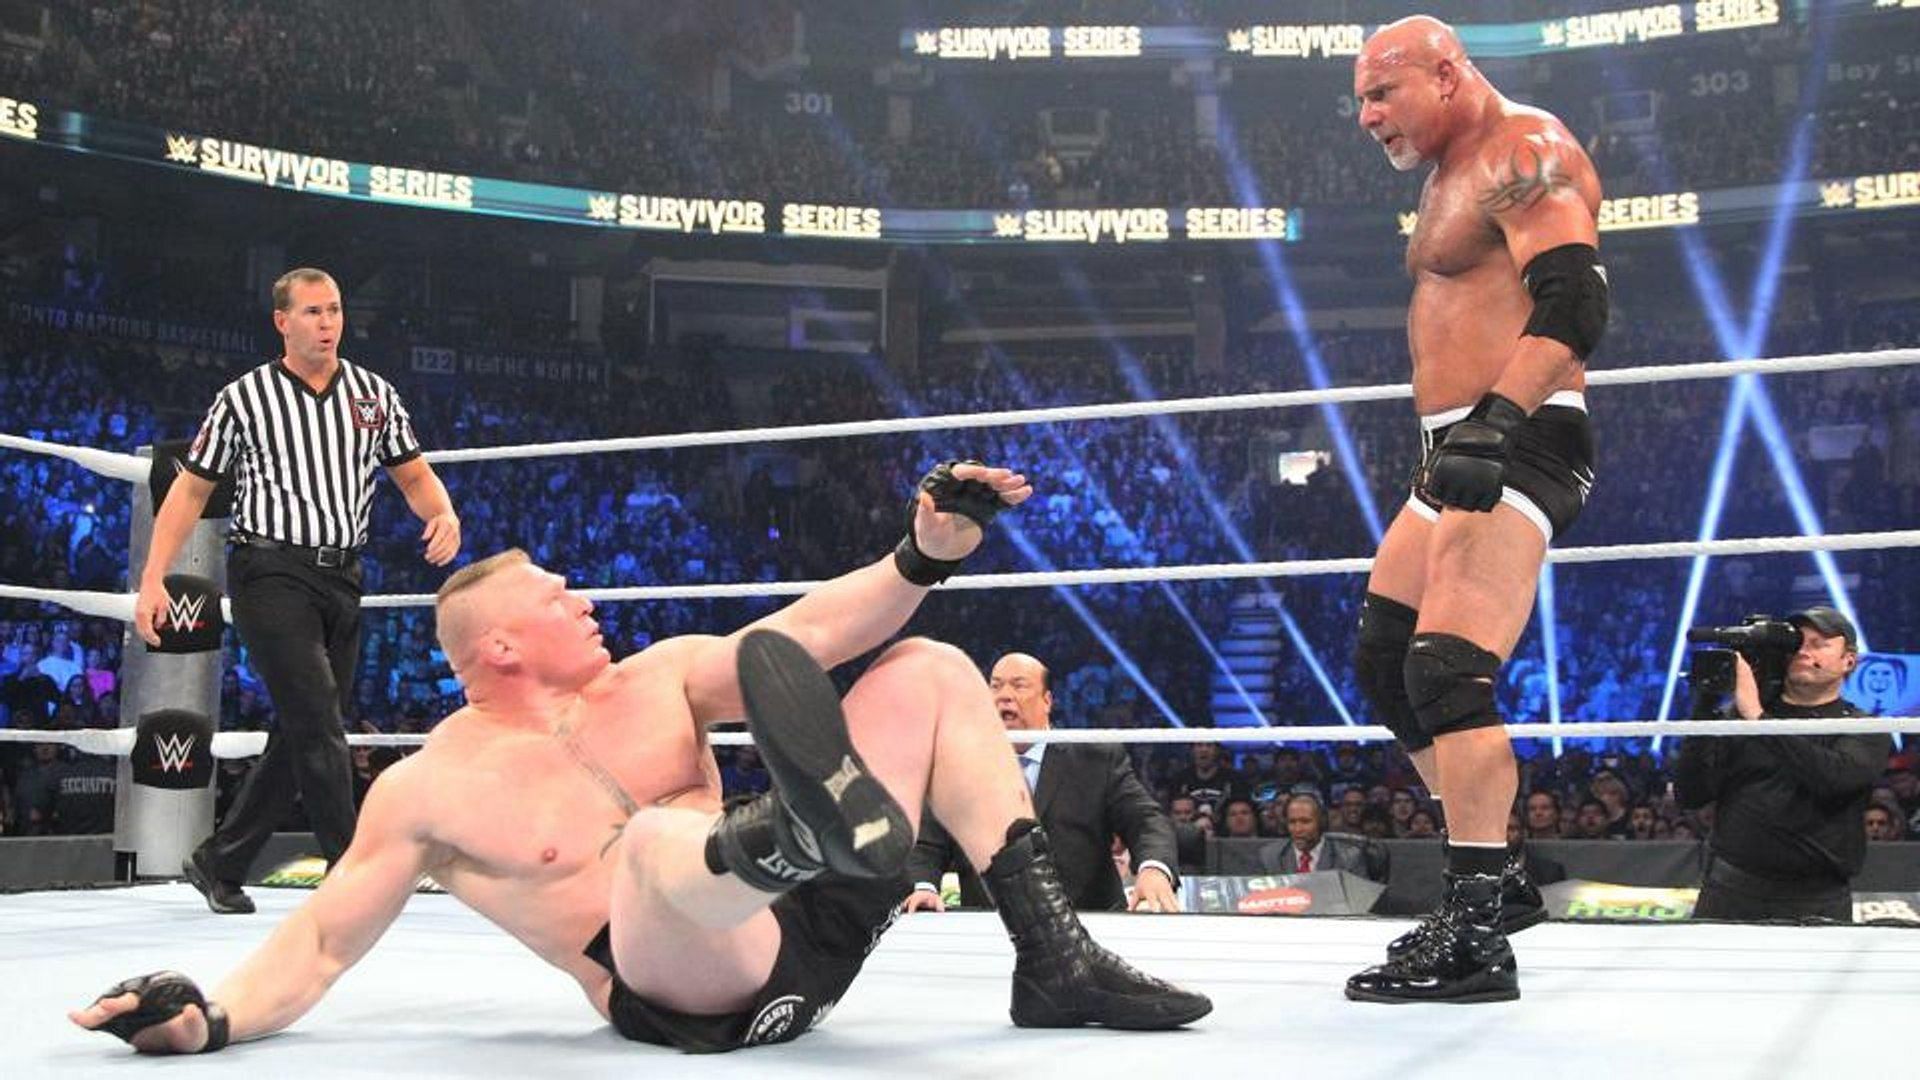 Many fans would love to see another match between Brock Lesnar and Goldberg in WWE.